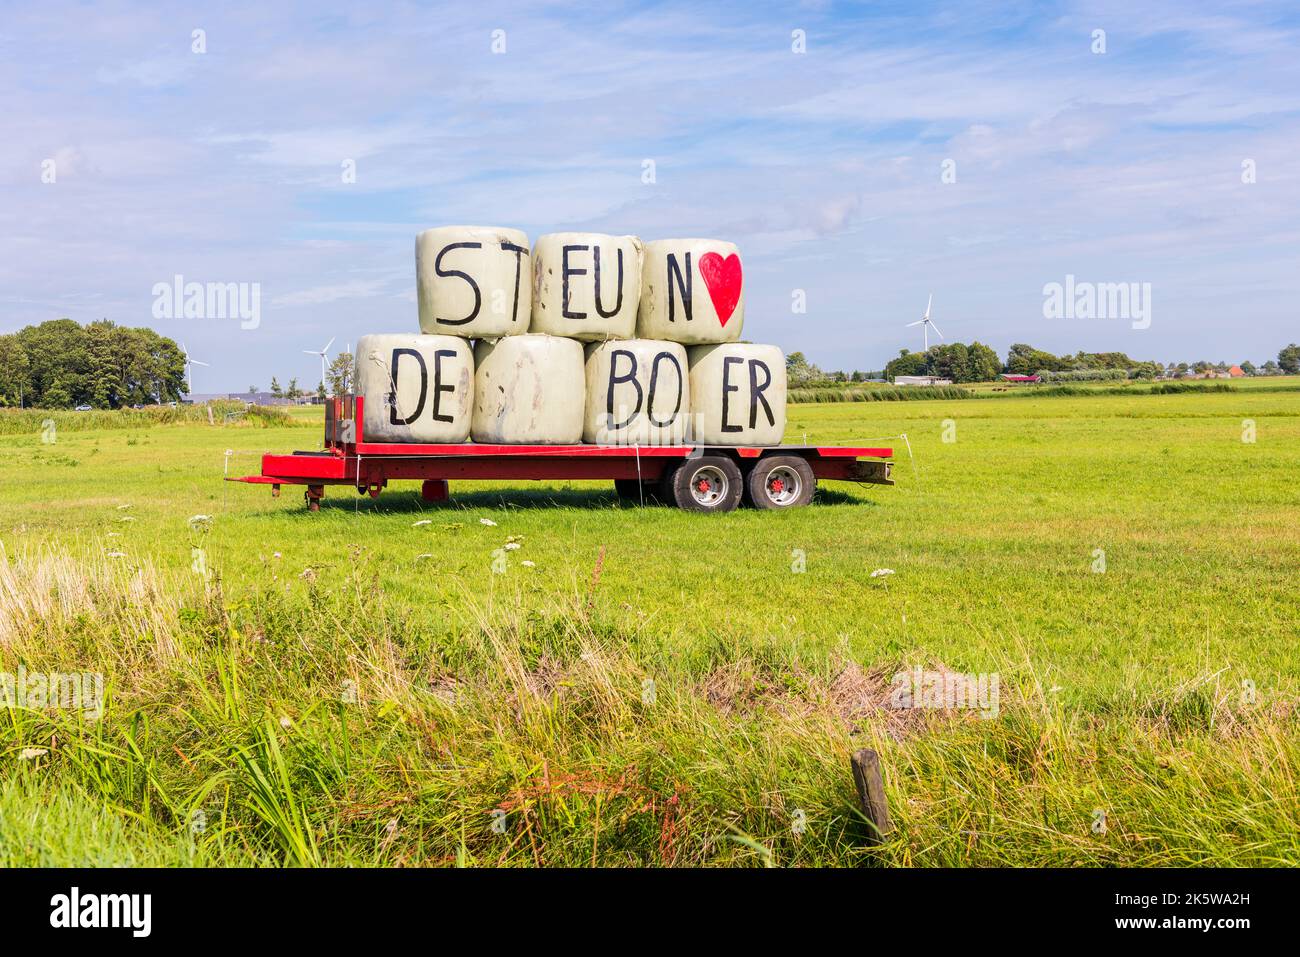 Support The Farmer letters on hay bales on trailer in meadow in Heiloo, The Netherlands. Stock Photo